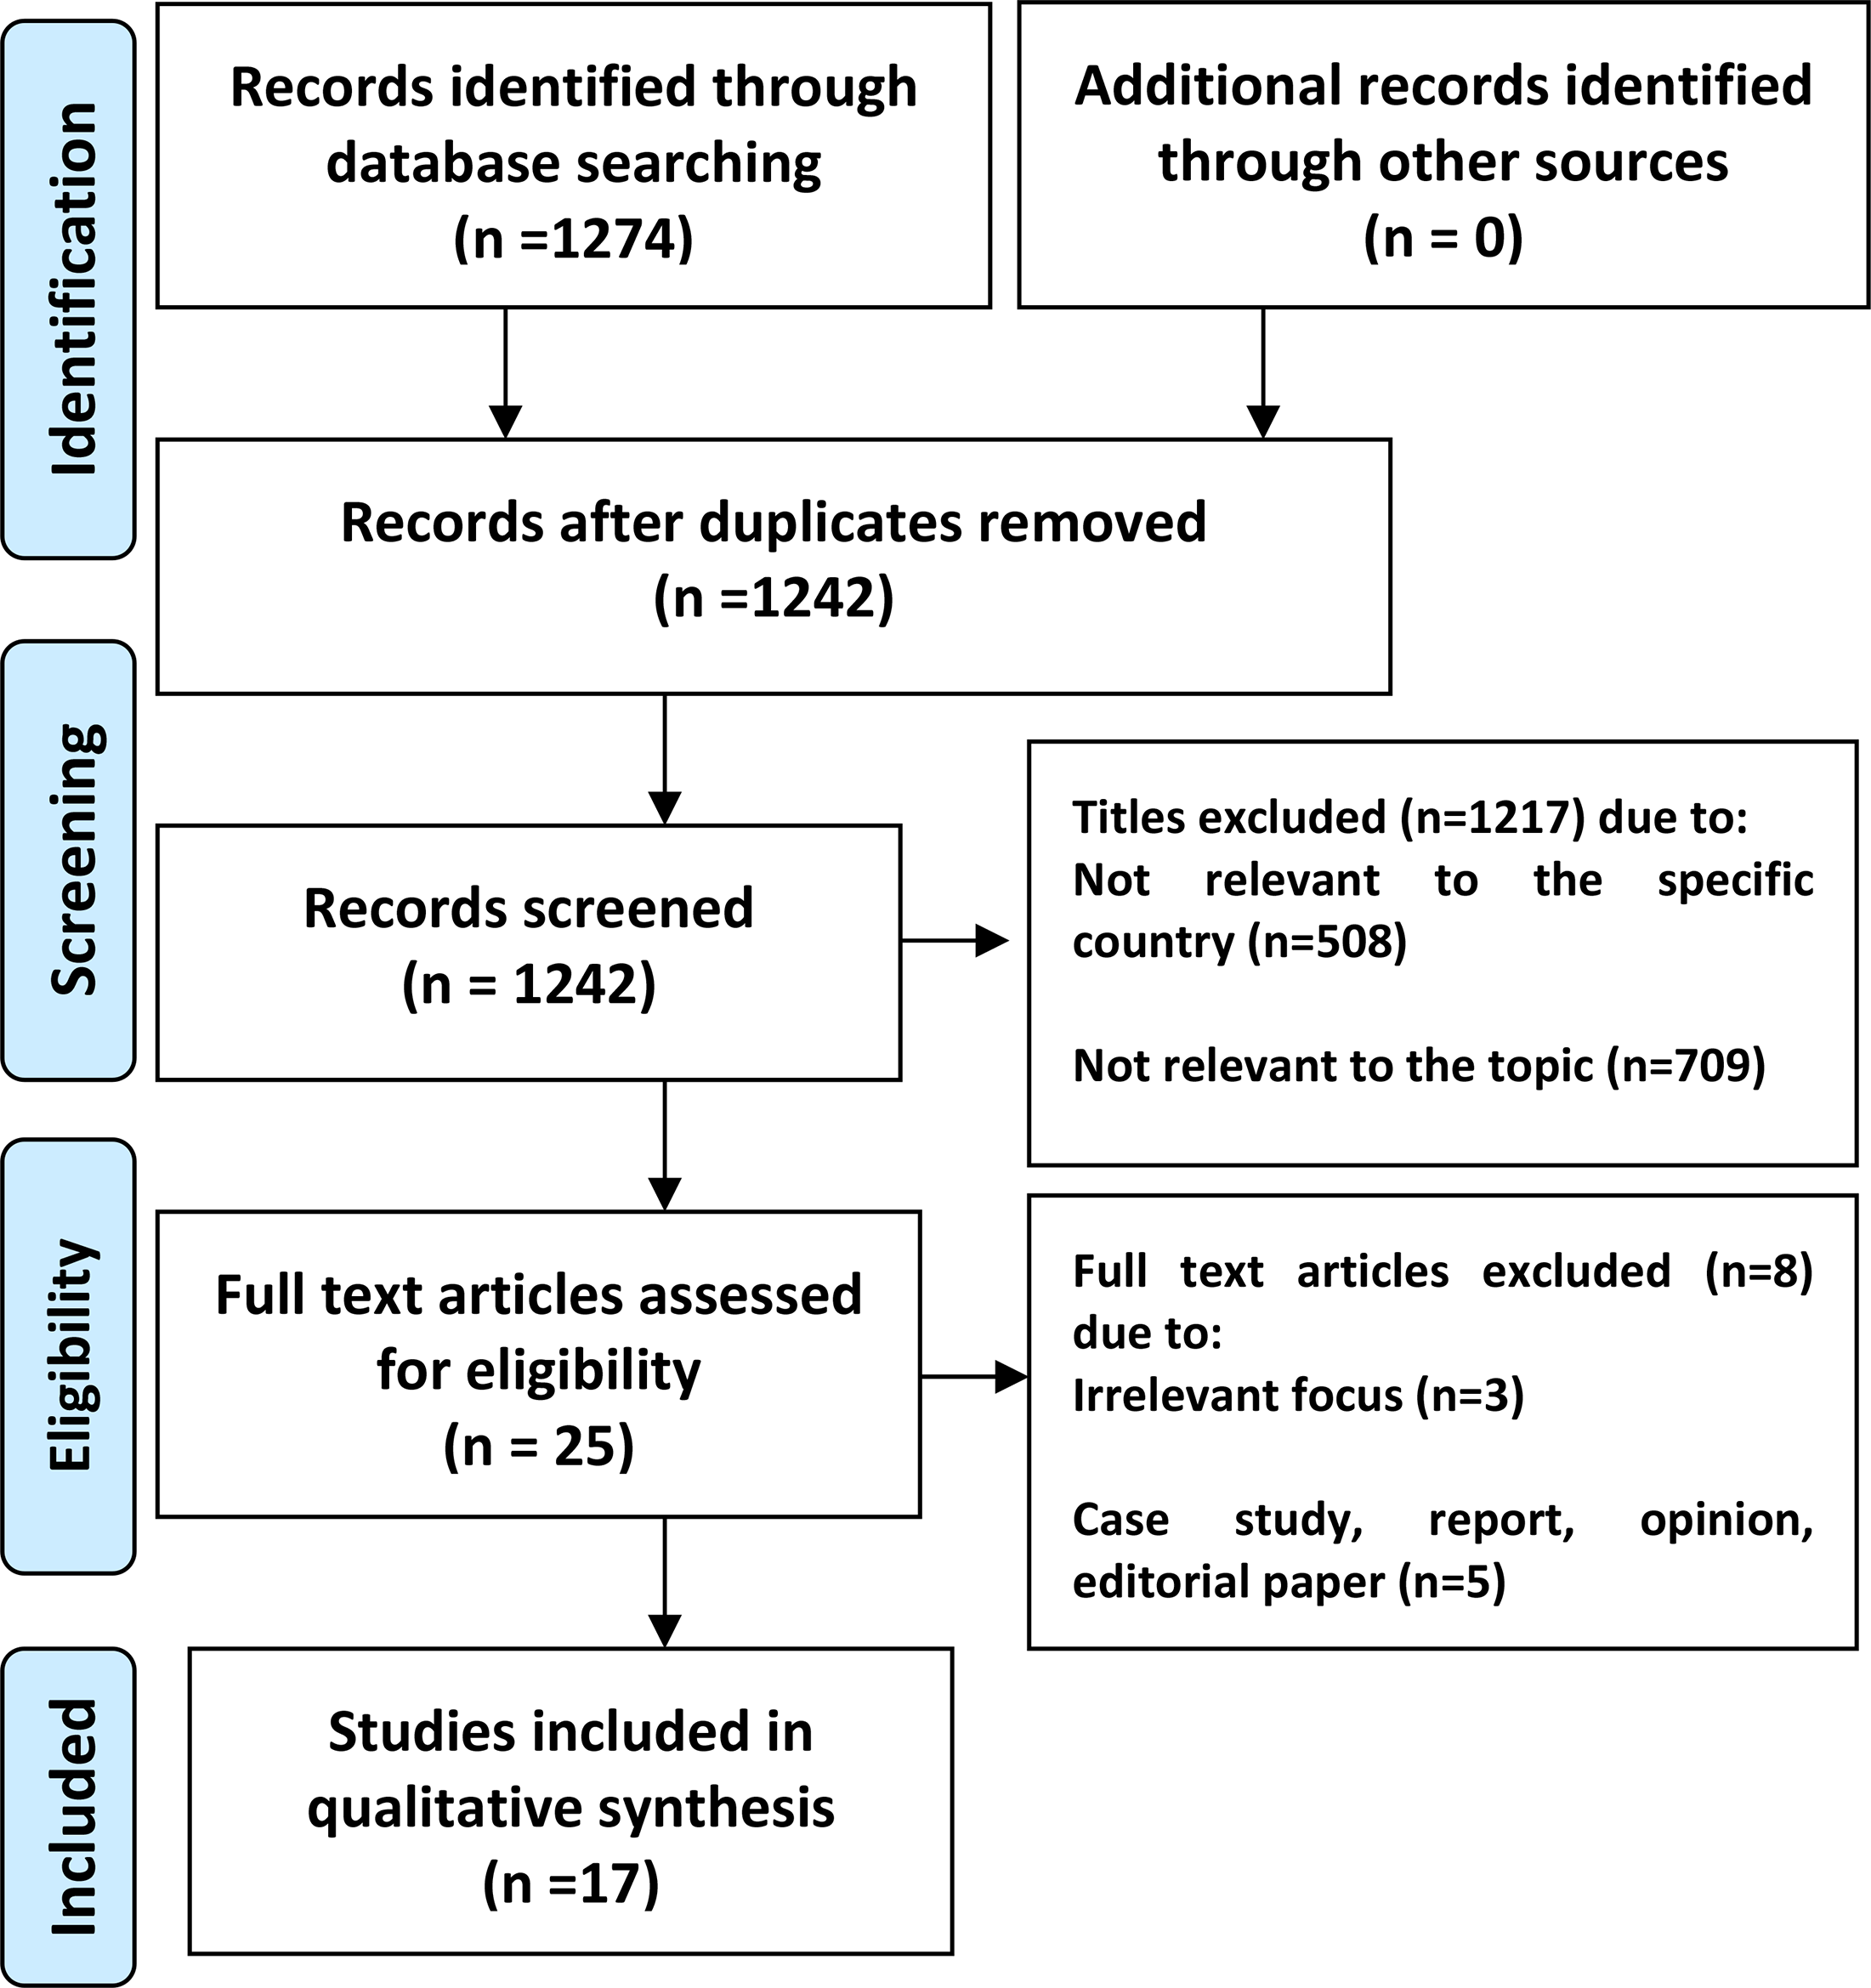 Medication errors in the Southeast Asian countries: a systematic review